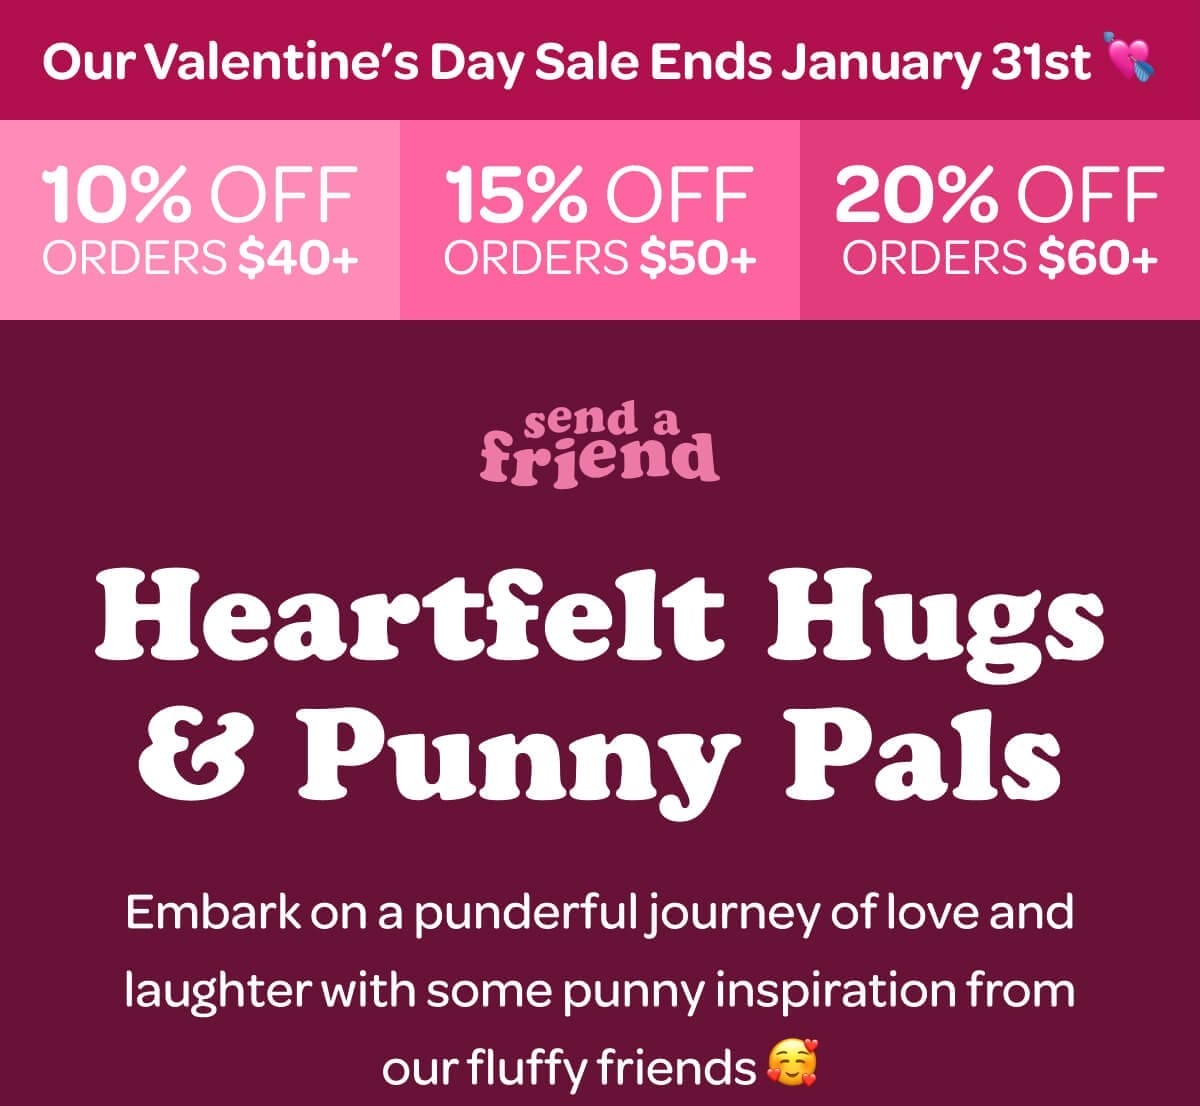 Our Valentine’s Day Sale Ends January 31st 💘 10% OFF ORDERS \\$40+. 15% OFF ORDERS \\$50+. 20% OFF ORDERS \\$60+. Heartfelt Hugs & Punny Pals. Embark on a punderful journey of love and laughter with some punny inspiration from our fluffy friends 🥰